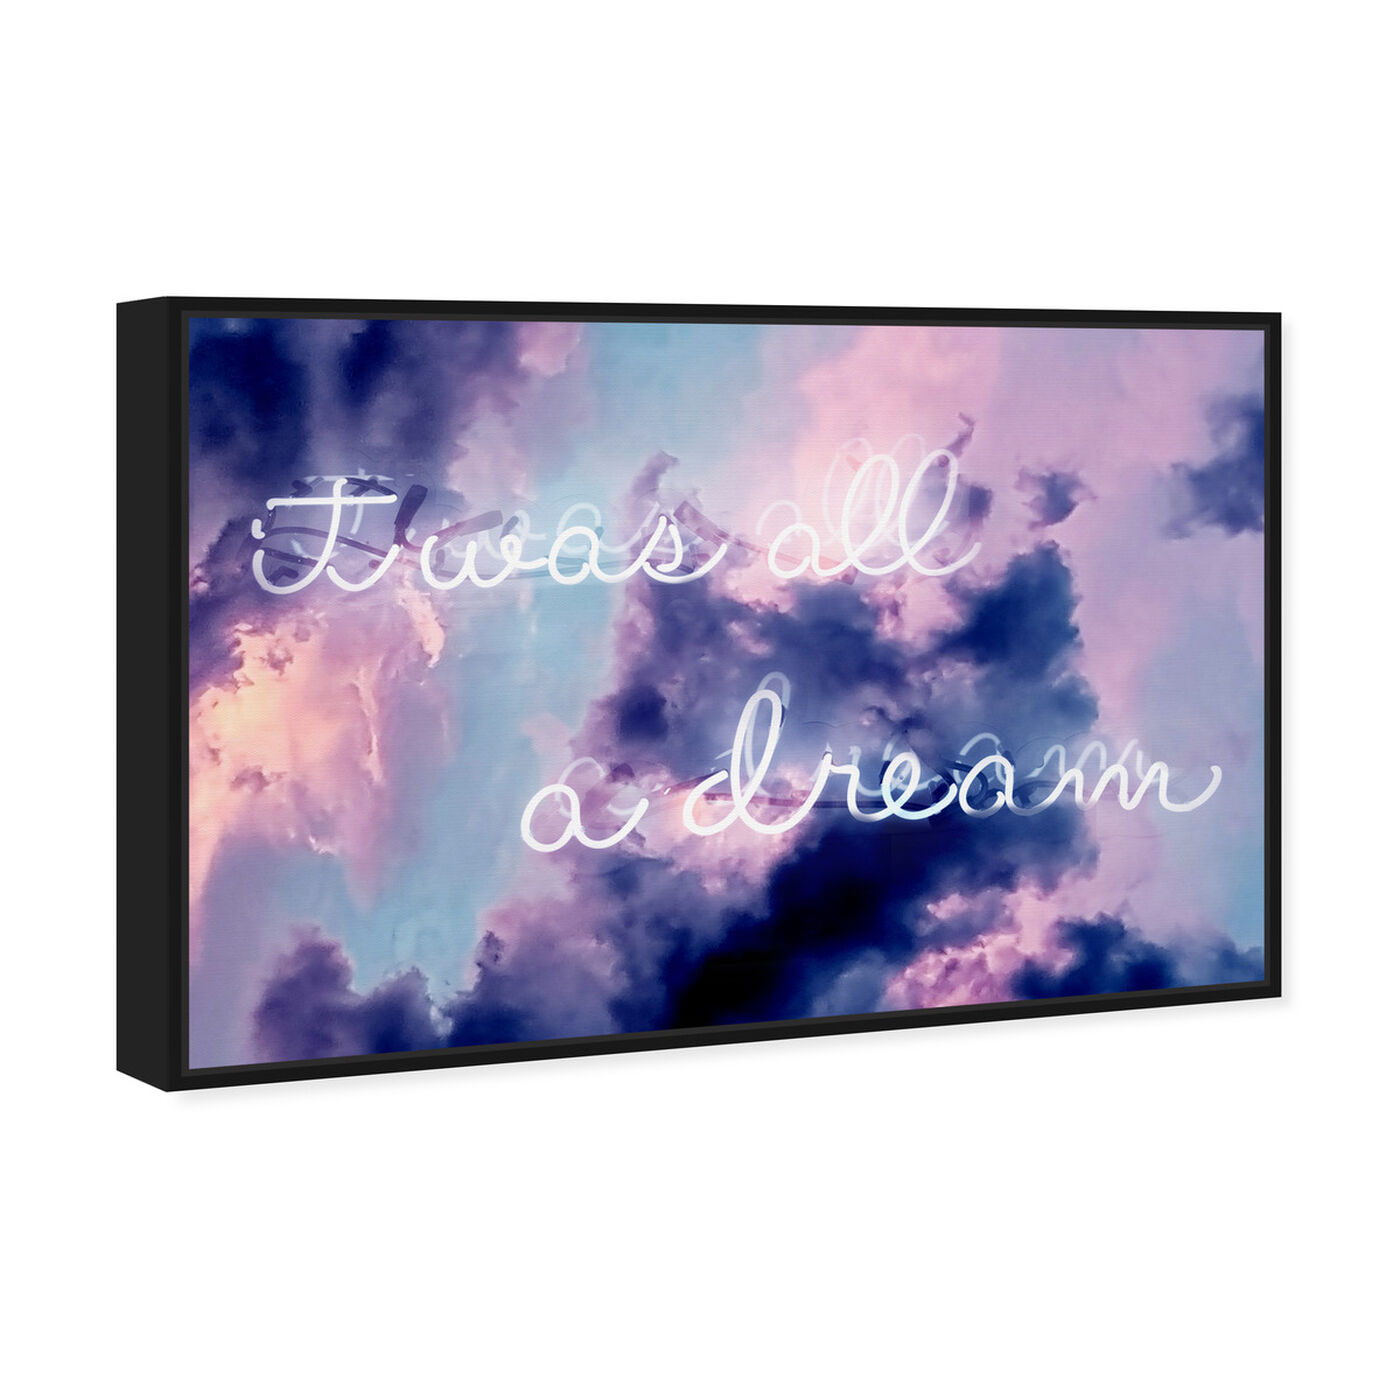 Angled view of IT WAS ALL A DREAM - LONG featuring typography and quotes and motivational quotes and sayings art.